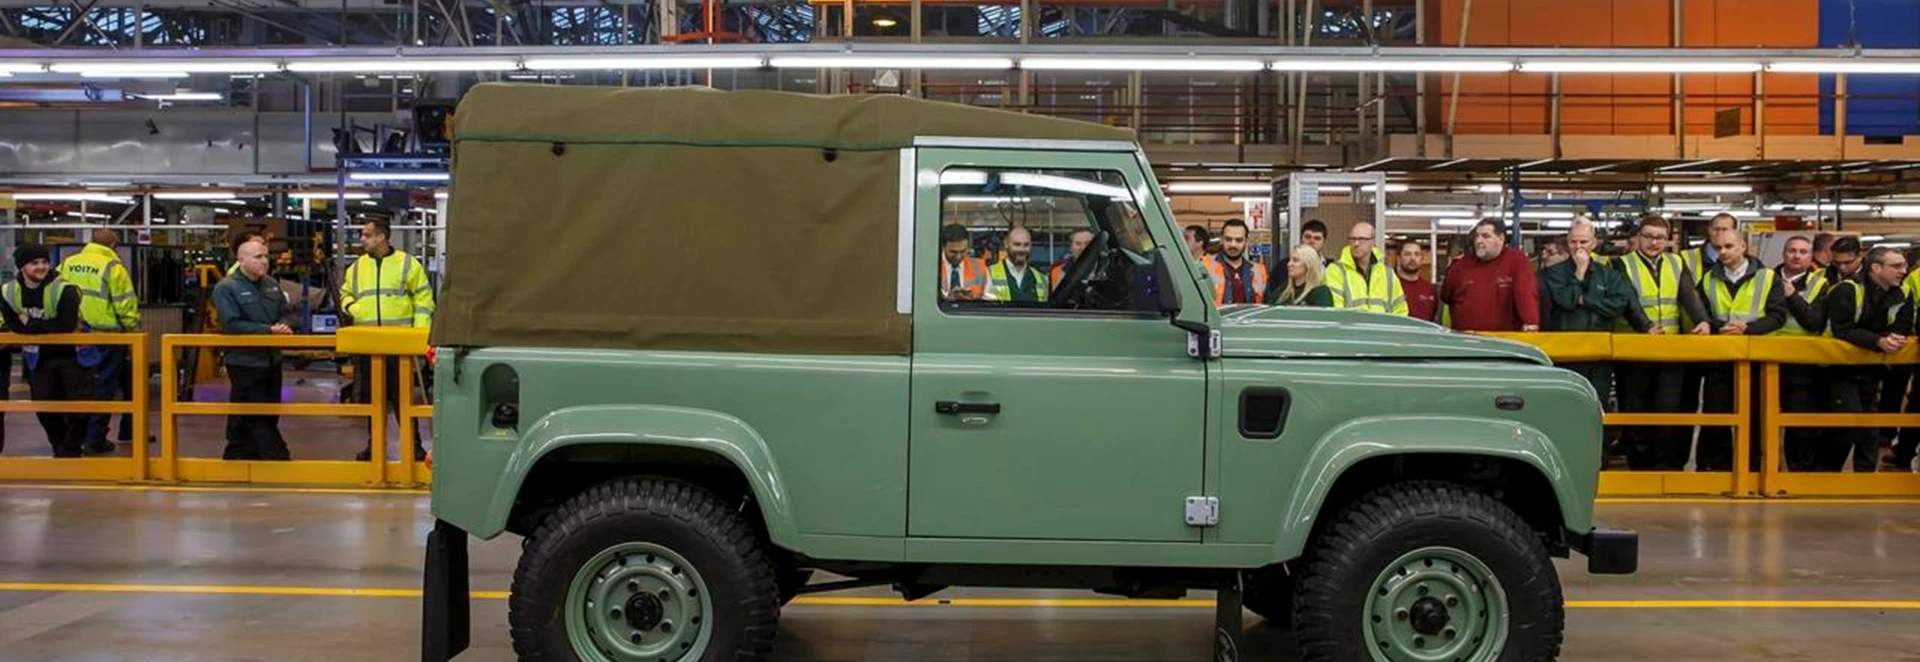 End of the Defender as last-ever model leaves Solihull plant